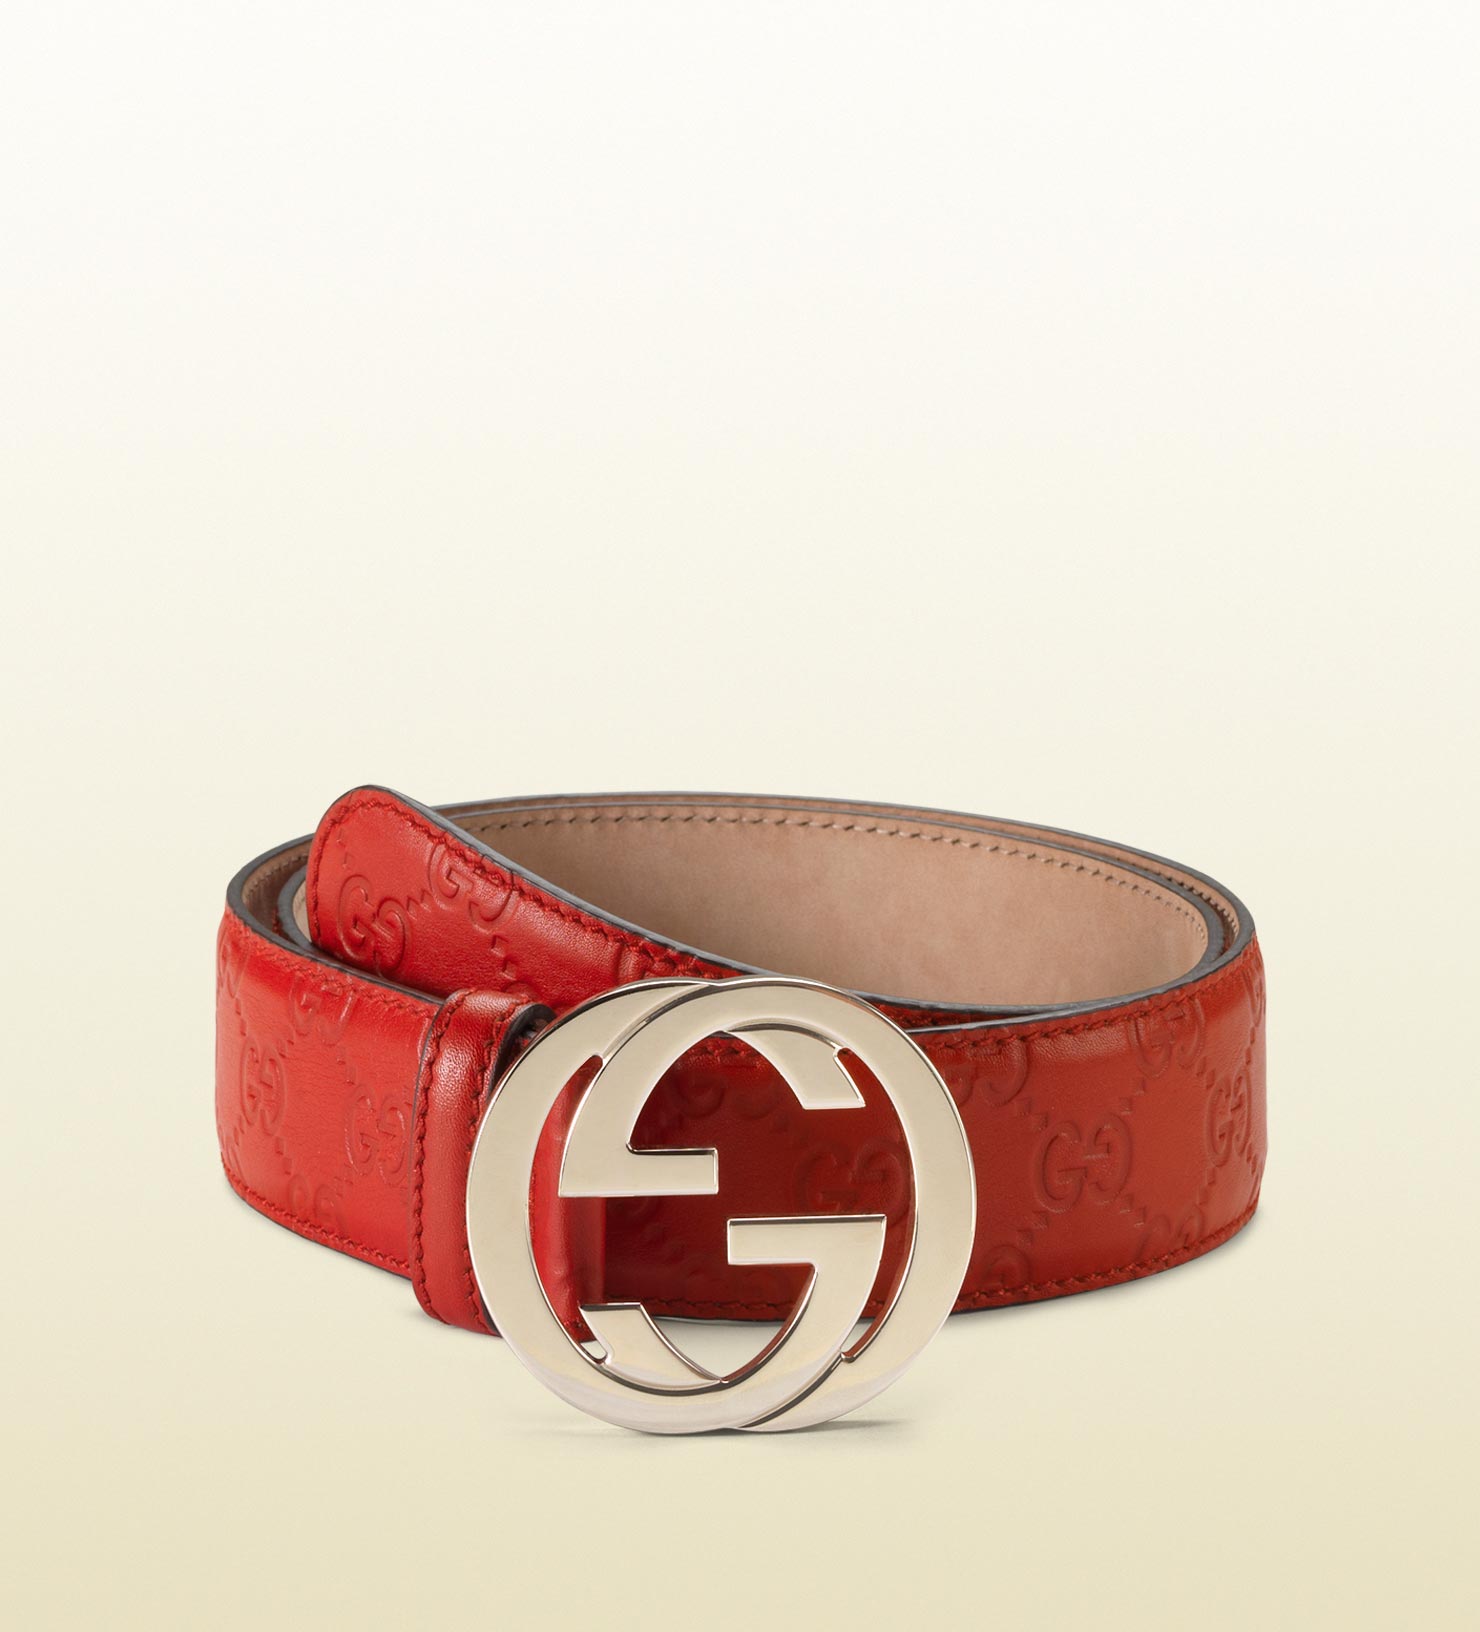 Gucci Ssima Leather Belt With Interlocking G Buckle in Red - Lyst